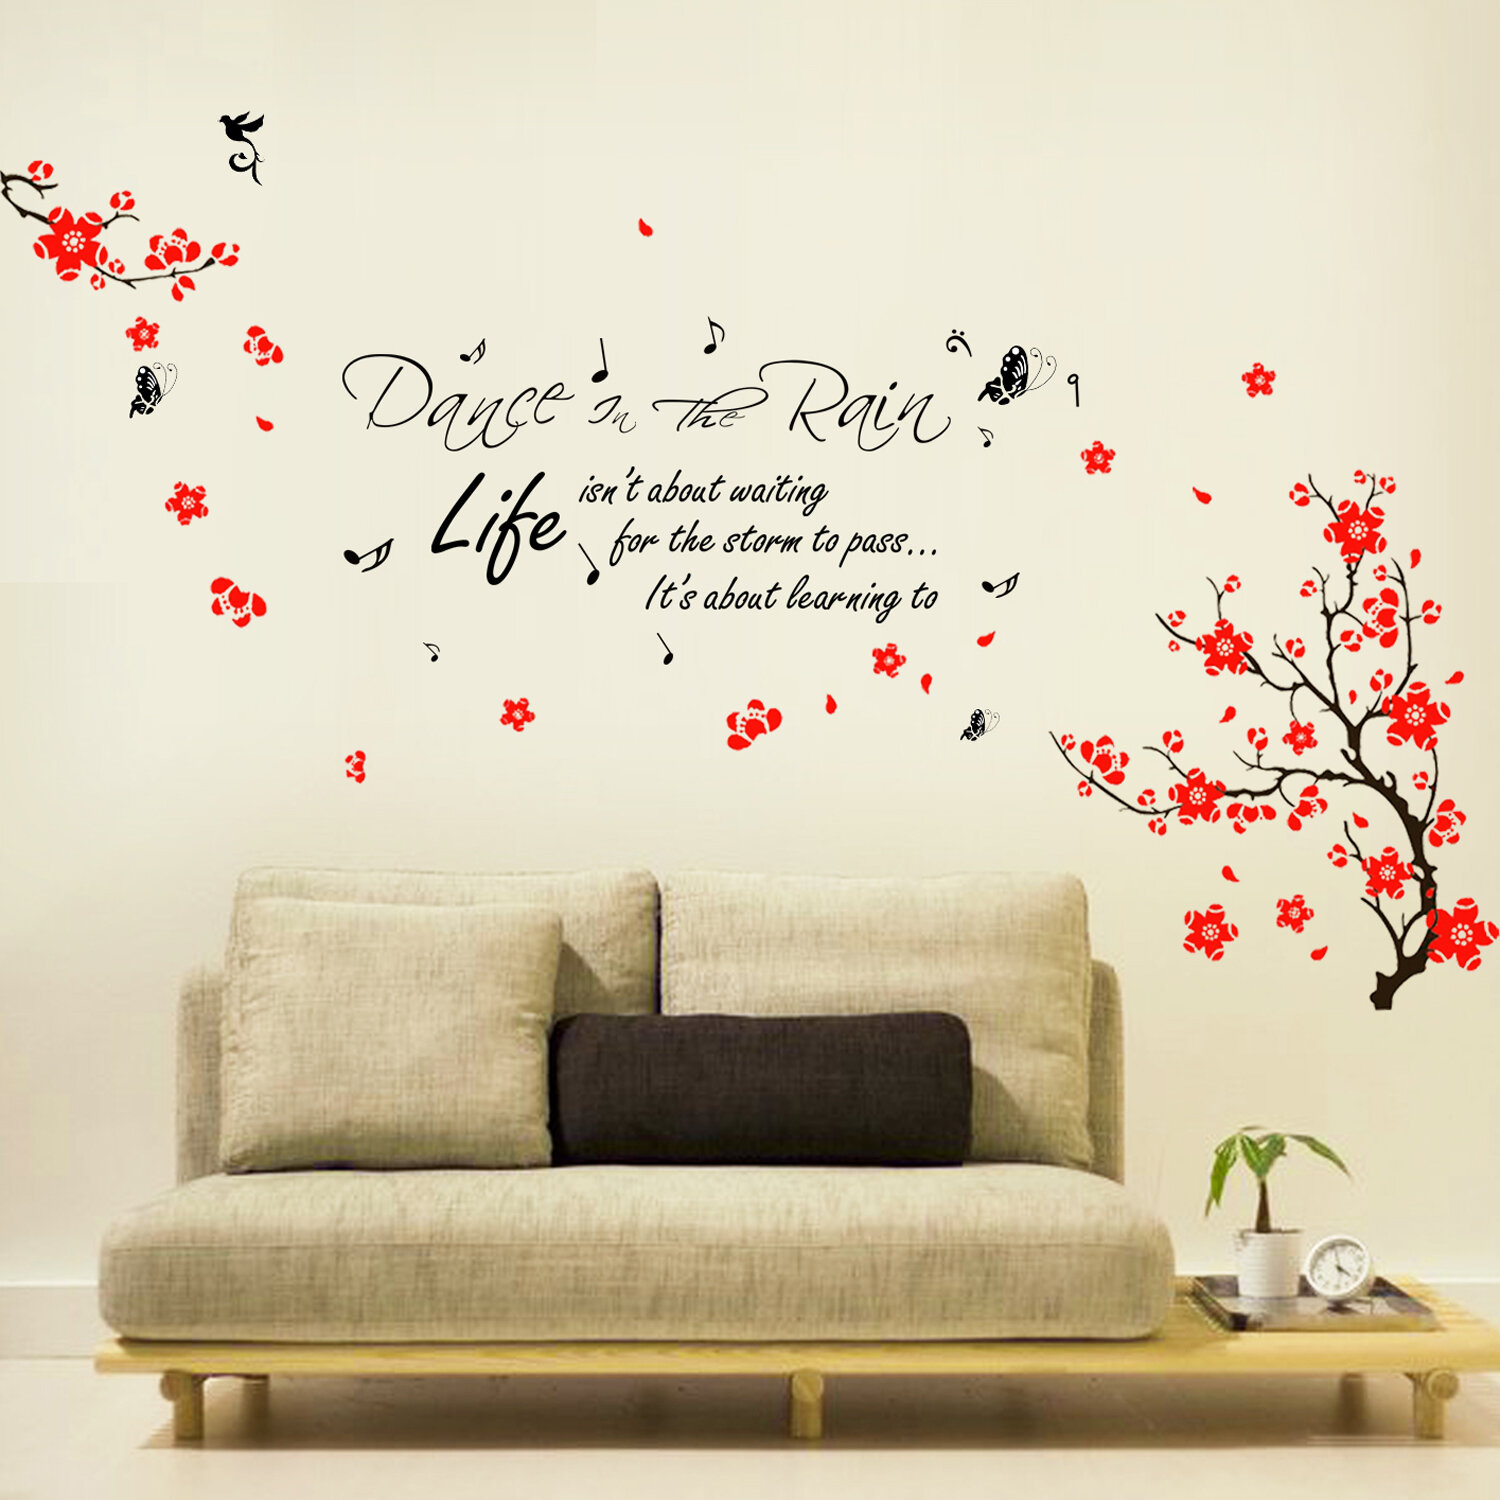 Dance in the rain-wall stickers decoration bedroom wallpaper Home Fresh Decal